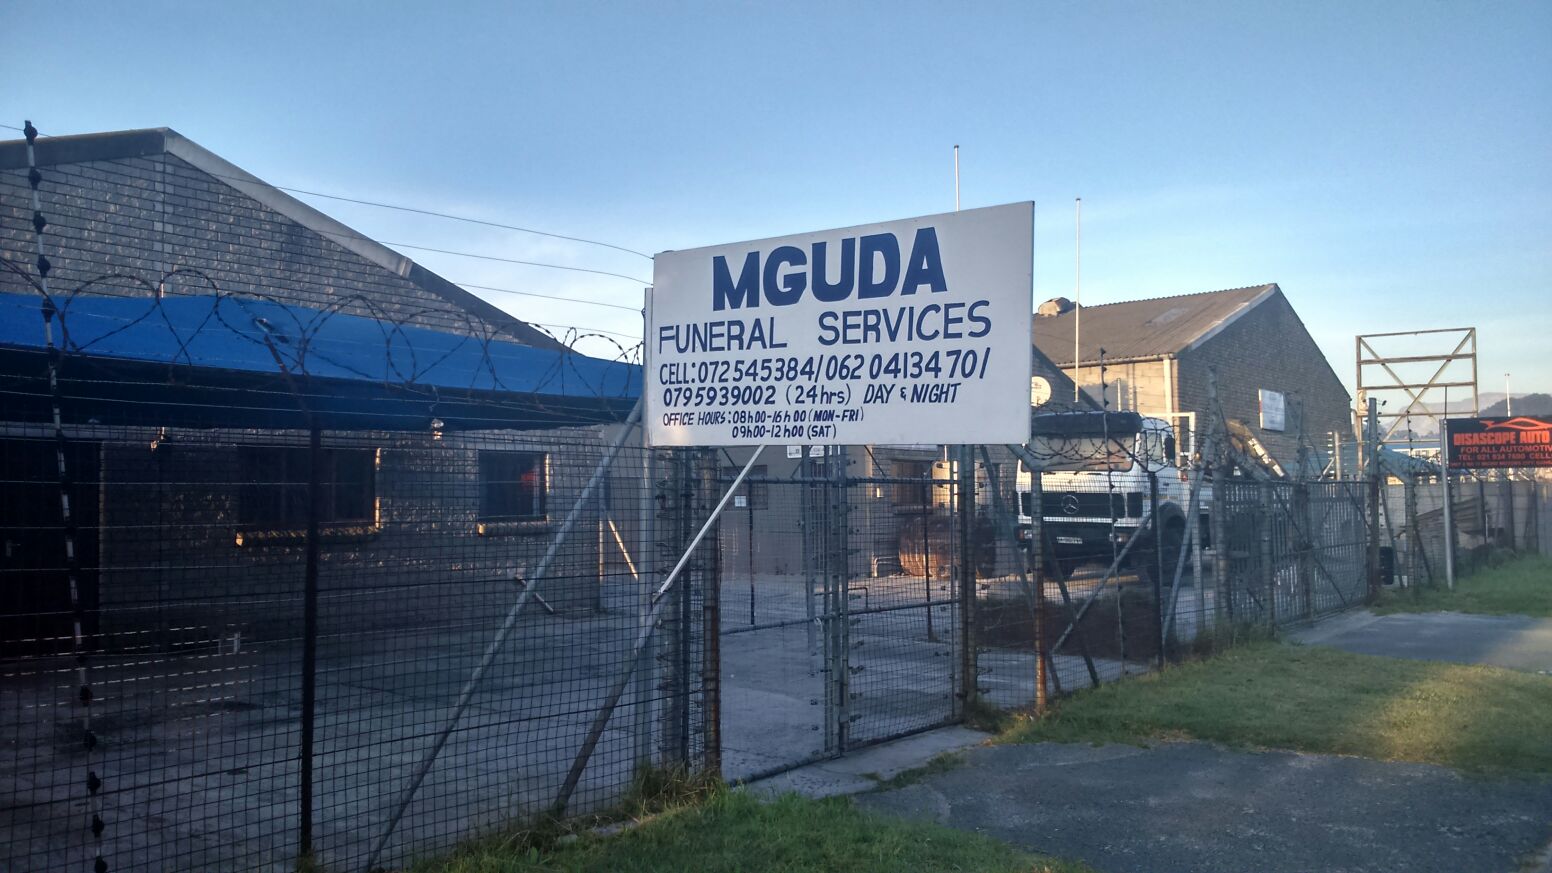 Mguda Funeral Services